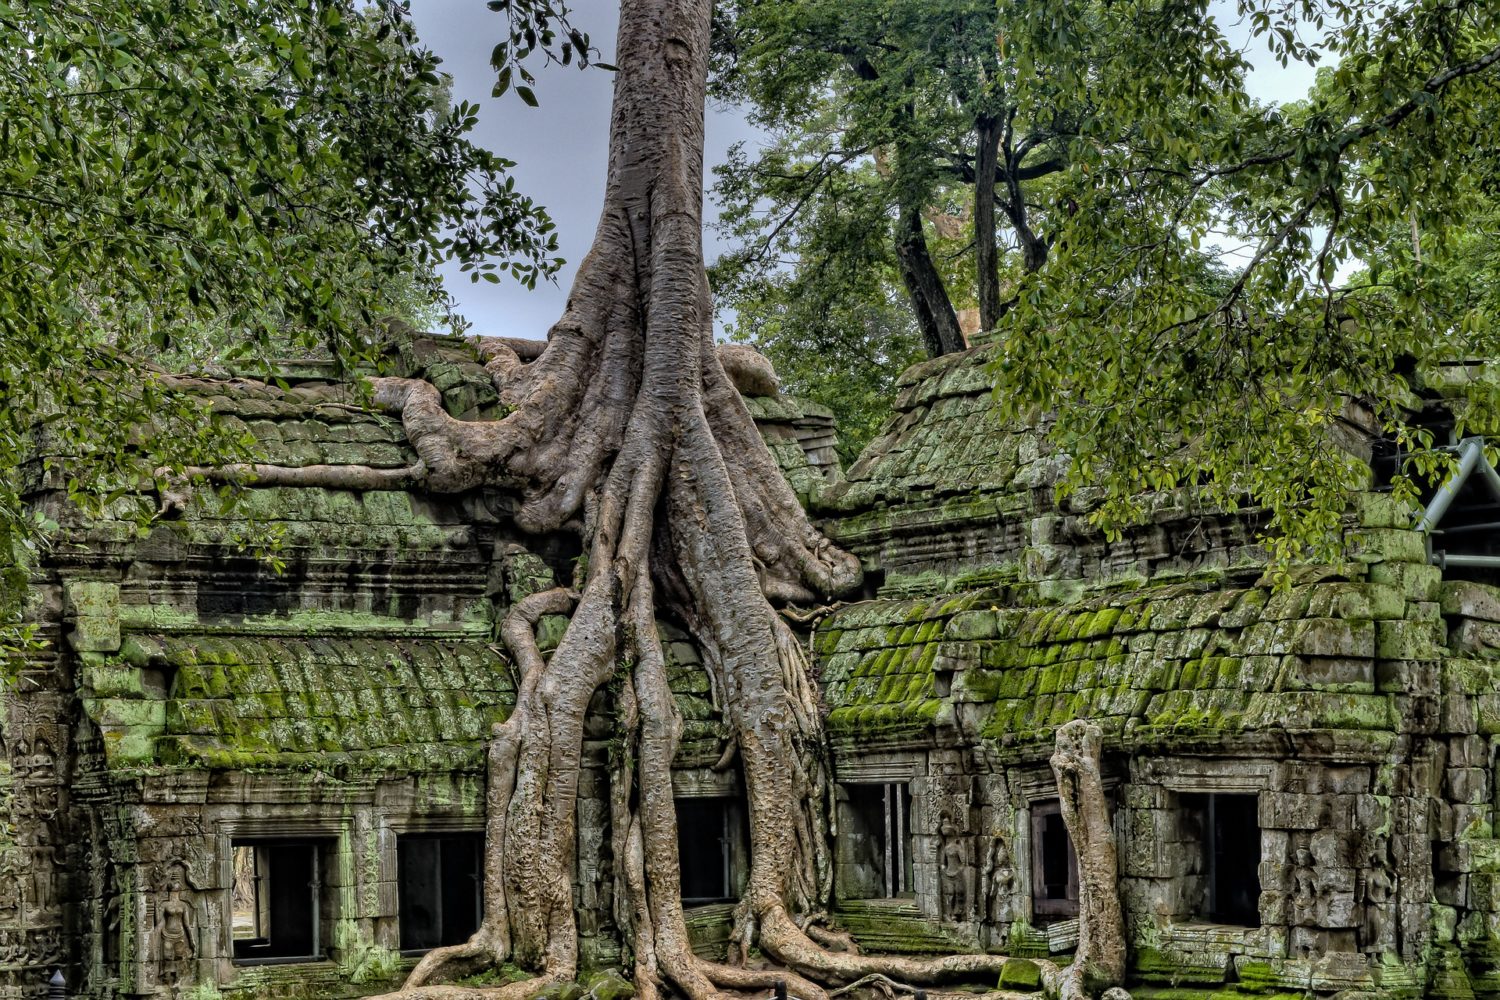 Jungle trees encroaching ancient temples